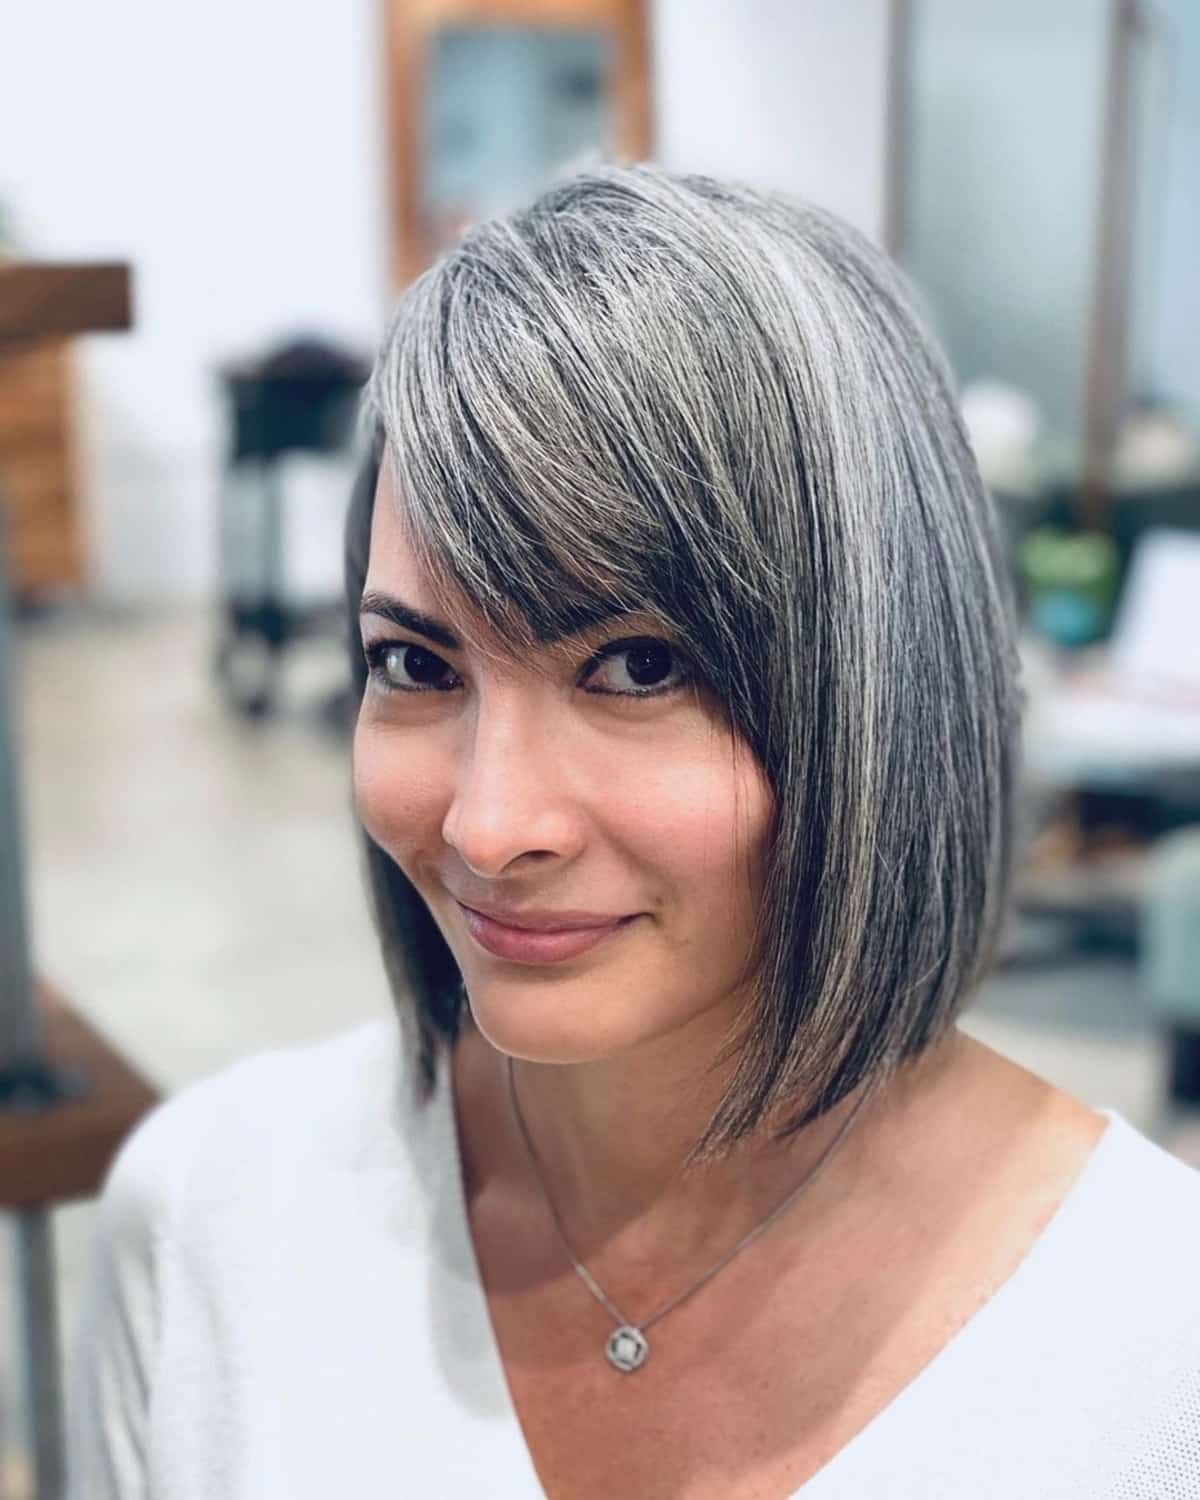 Flattering Graduated Bob for women in their 40s with a square face